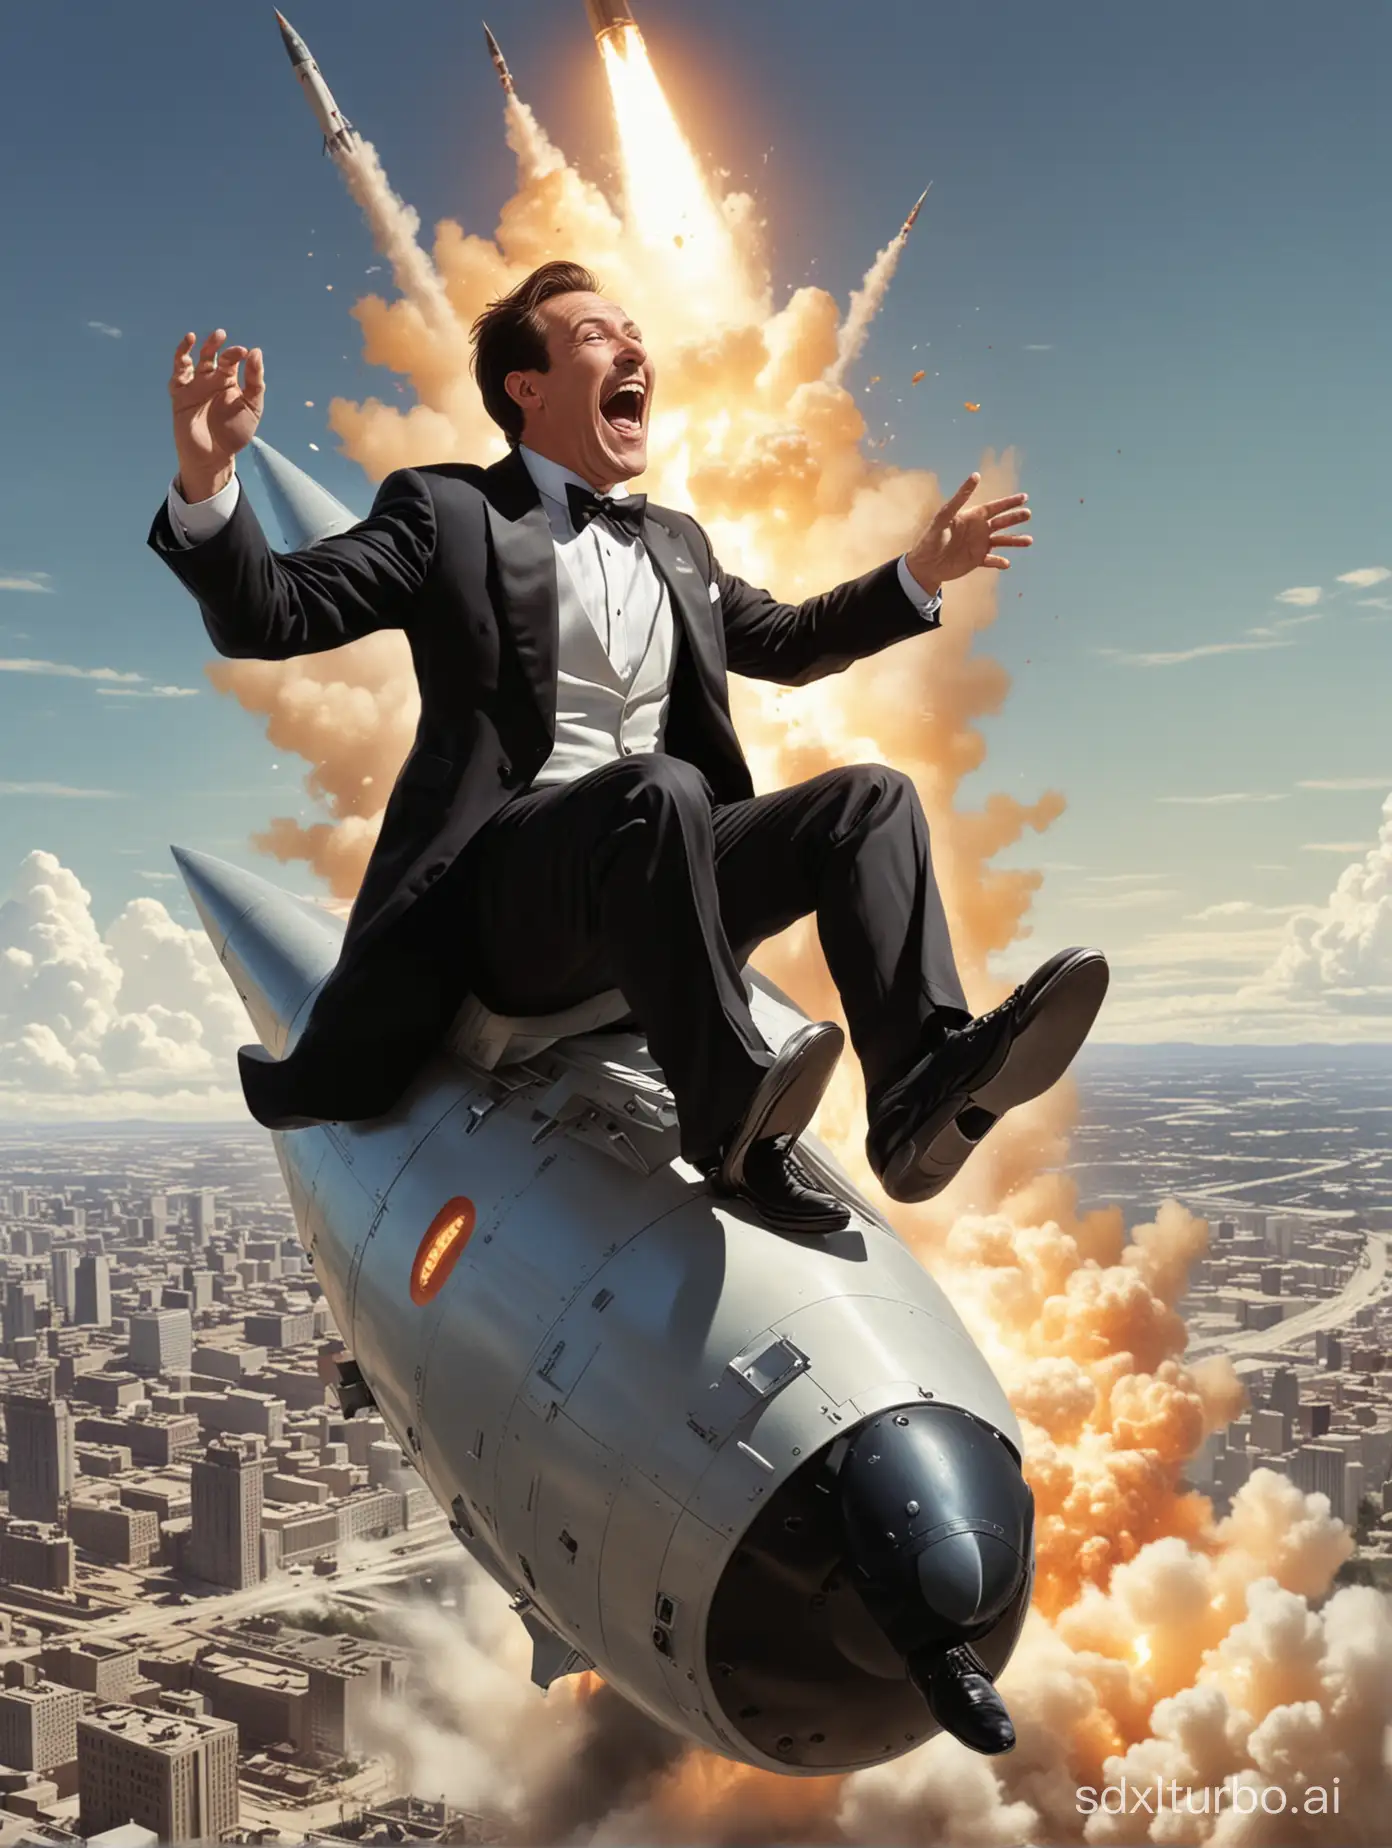 A laughing man in a tuxedo sits on top of a nuclear missile speeding toward the city.